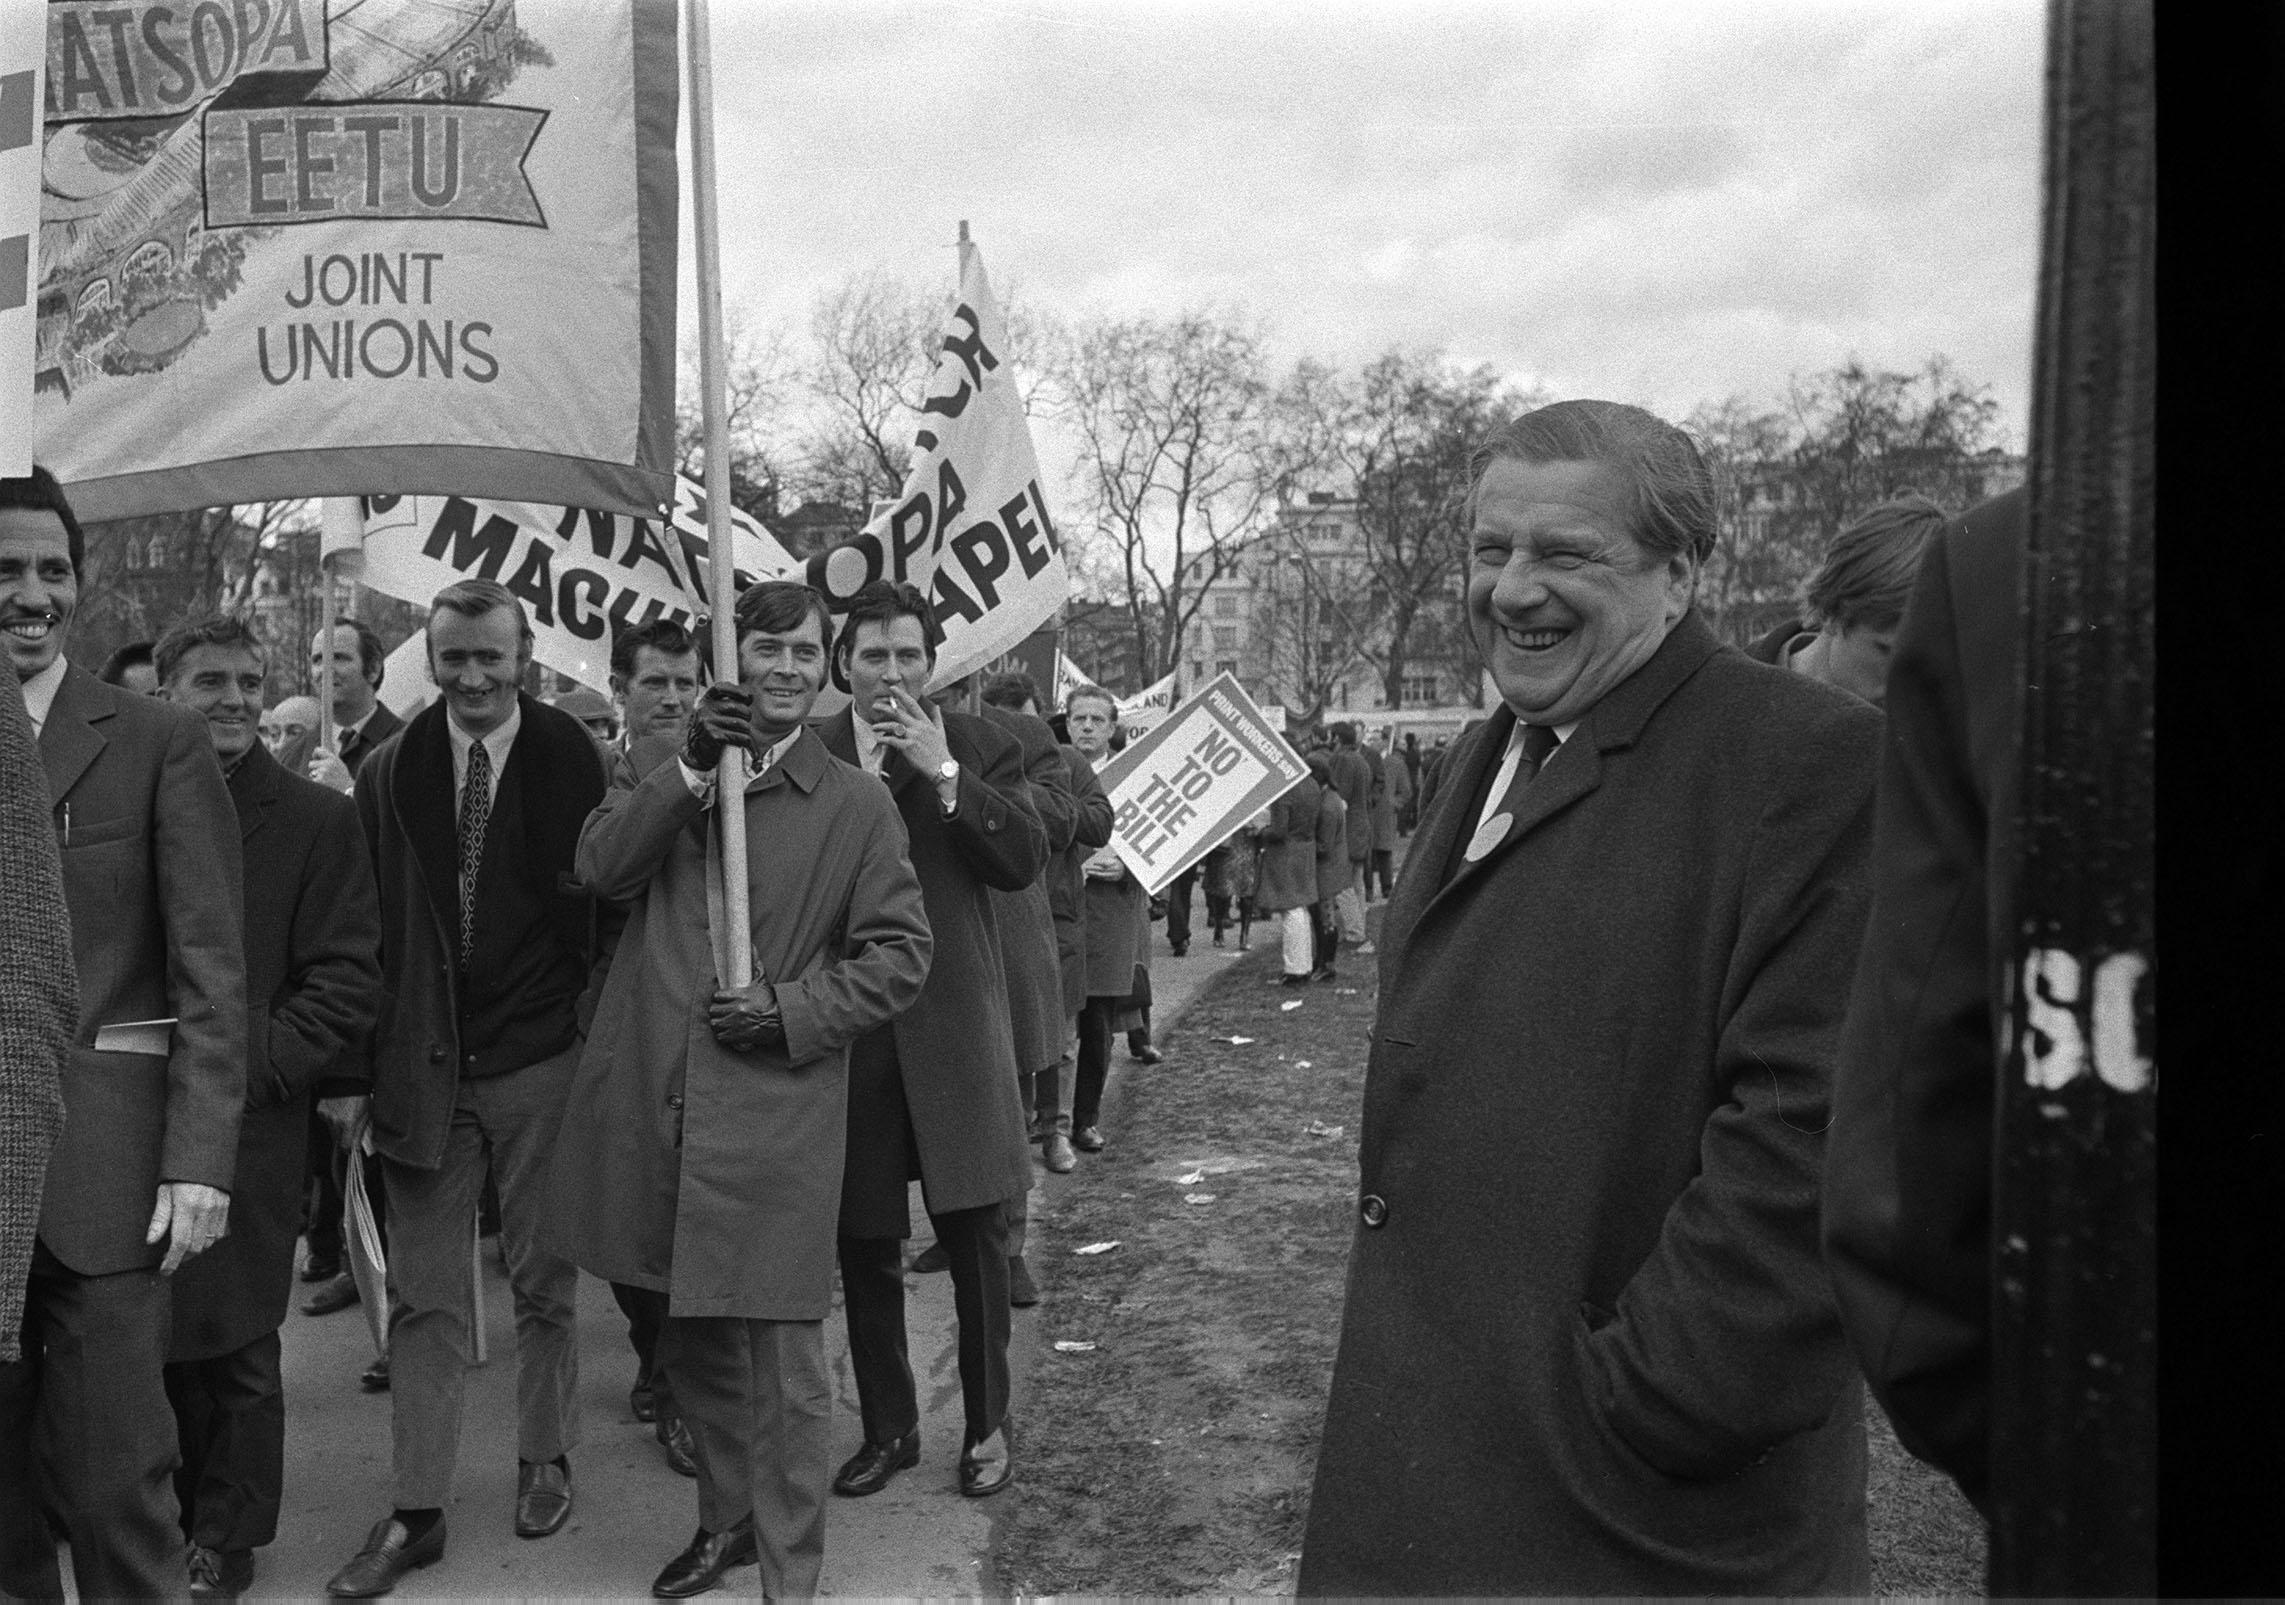 Sunny smiles on a serious occasion for TUC General Secretary Mr Vic Feather and Trade Union demonstrators as they started off a march from Speaker's Corner Hyde Park to Trafalgar Square in an organised an ddsciplined parade against the Government's Industrial Relations Bill.